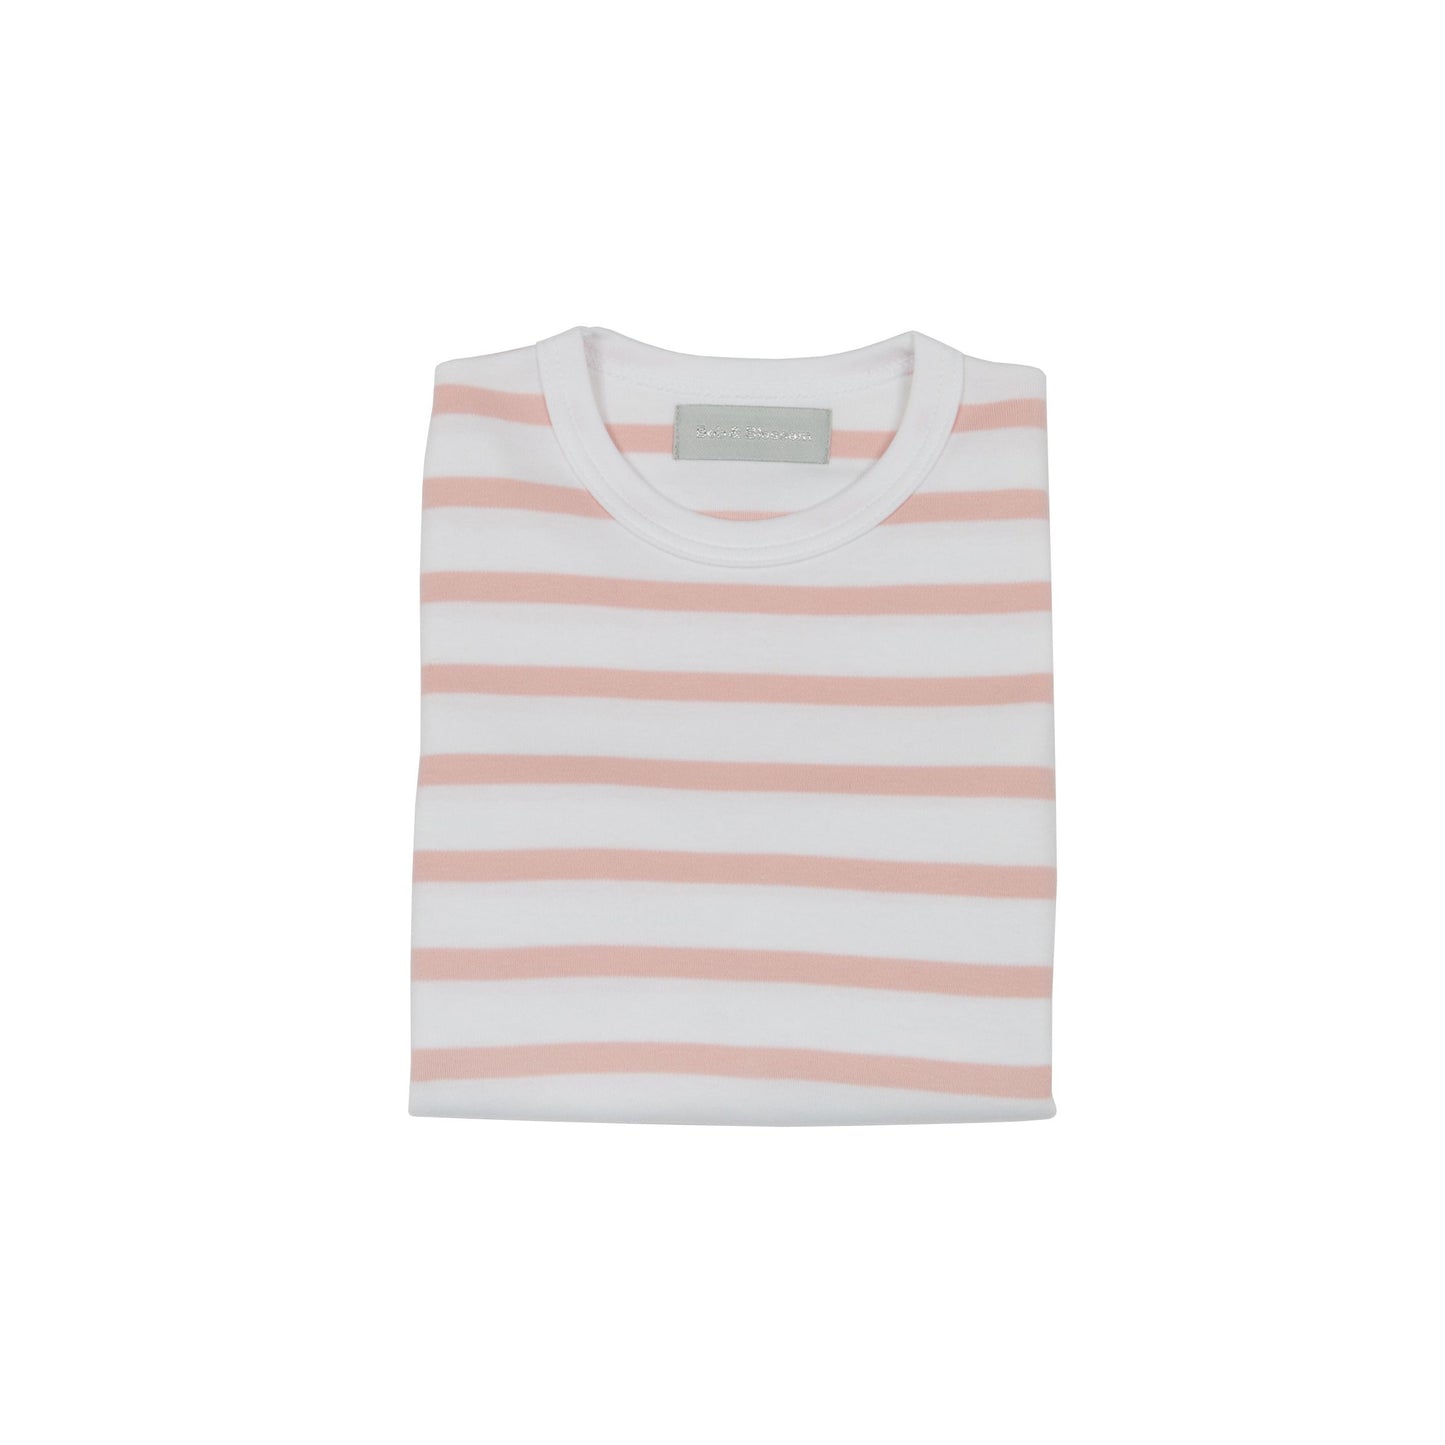 Dusty Pink and White Breton Striped T-Shirt